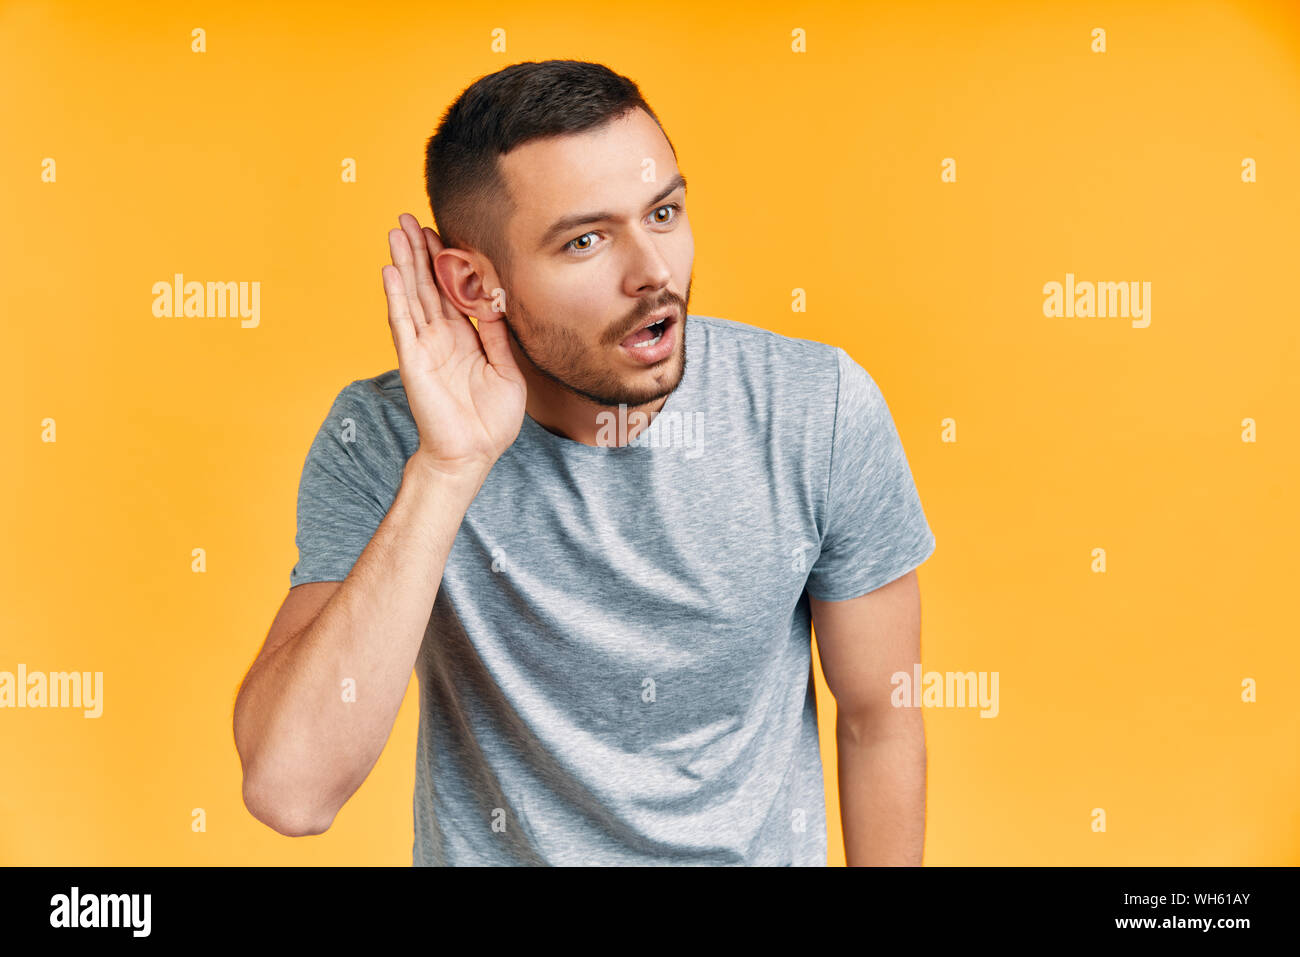 Young surprised man listening something carefully and holds his hand near ear over yellow background. communication, gossip, emotions concept Stock Photo